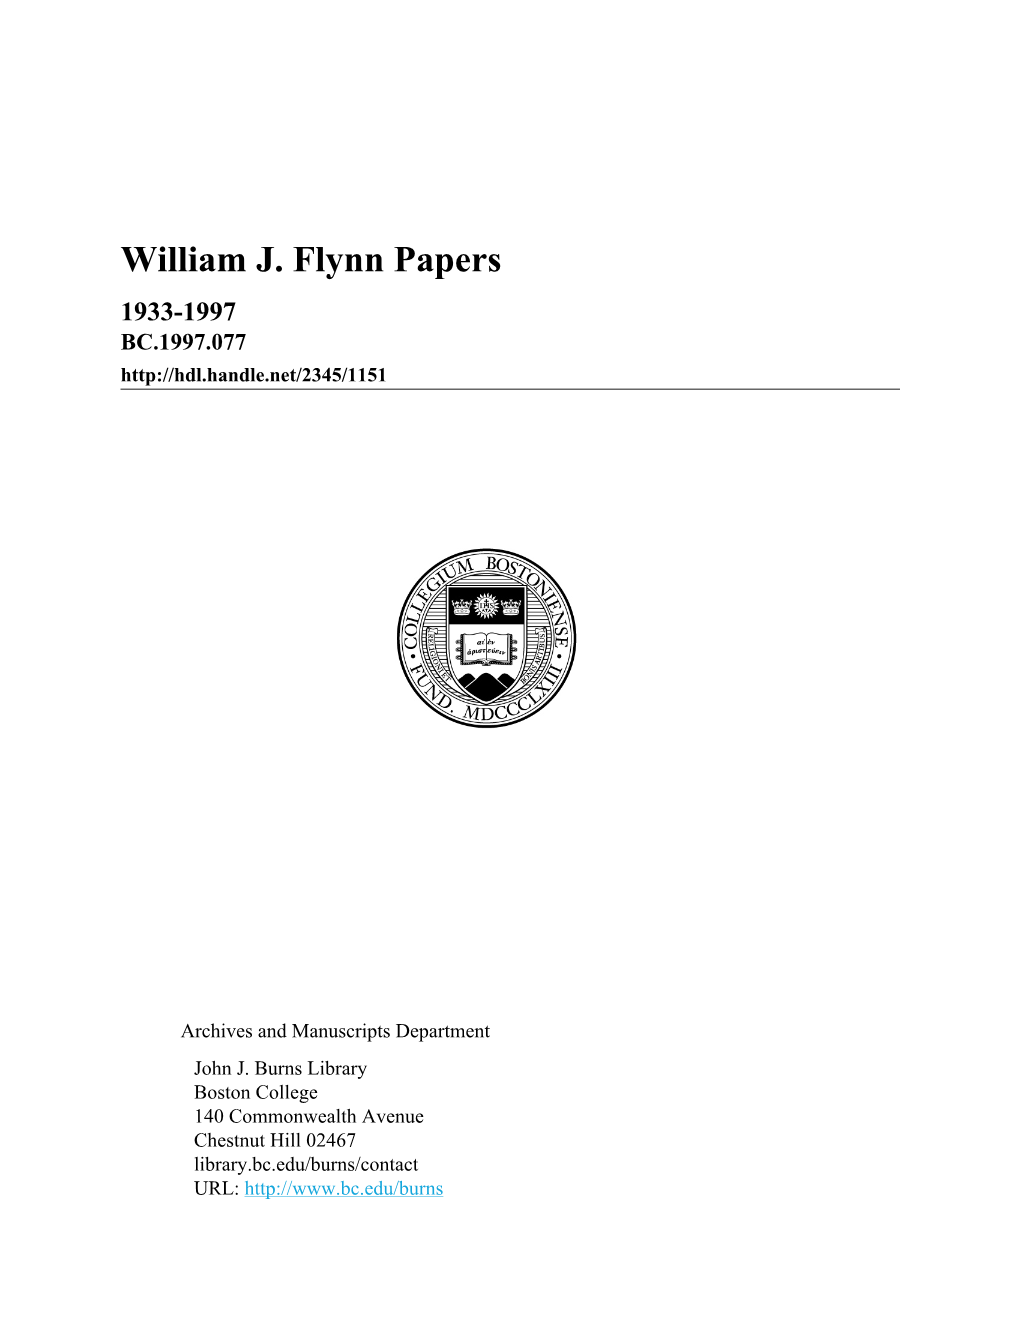 William J. Flynn Papers 1933-1997 BC.1997.077